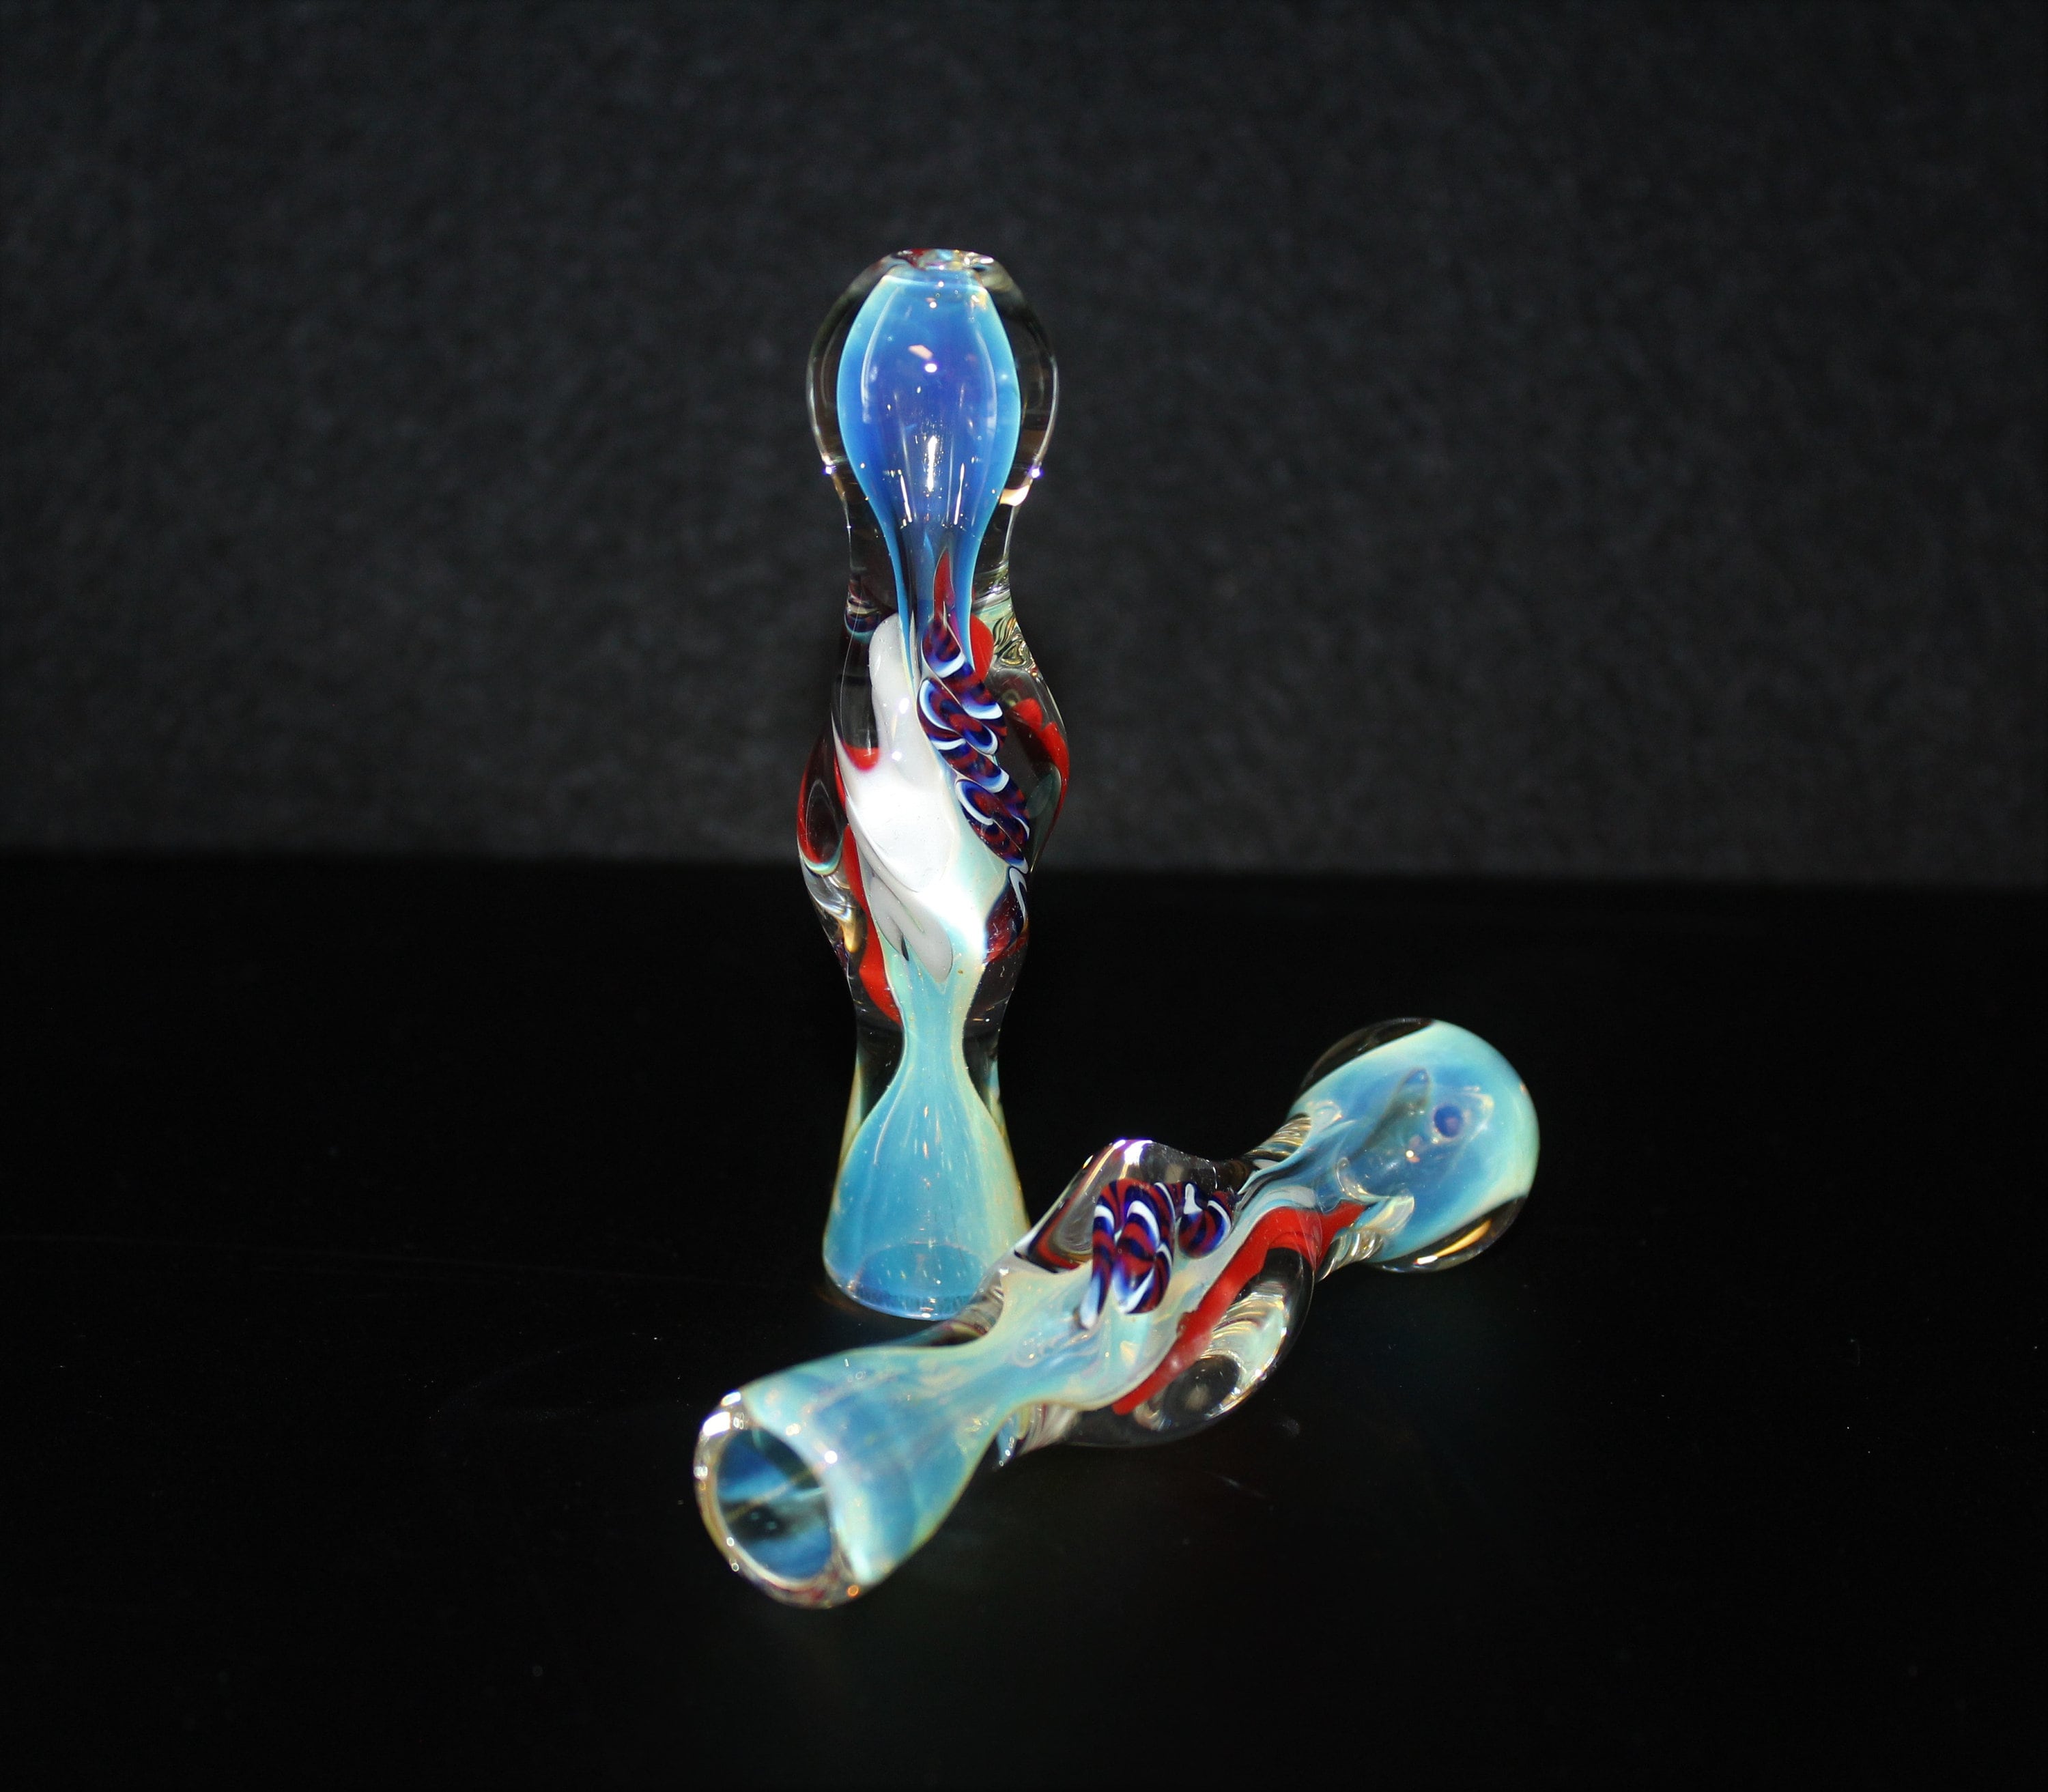 4 1/2 MIDNIGHT RUNNER Tobacco Smoking Glass Pipe Bowl THICK GLASS Pip –  The Hippie Momma Shop